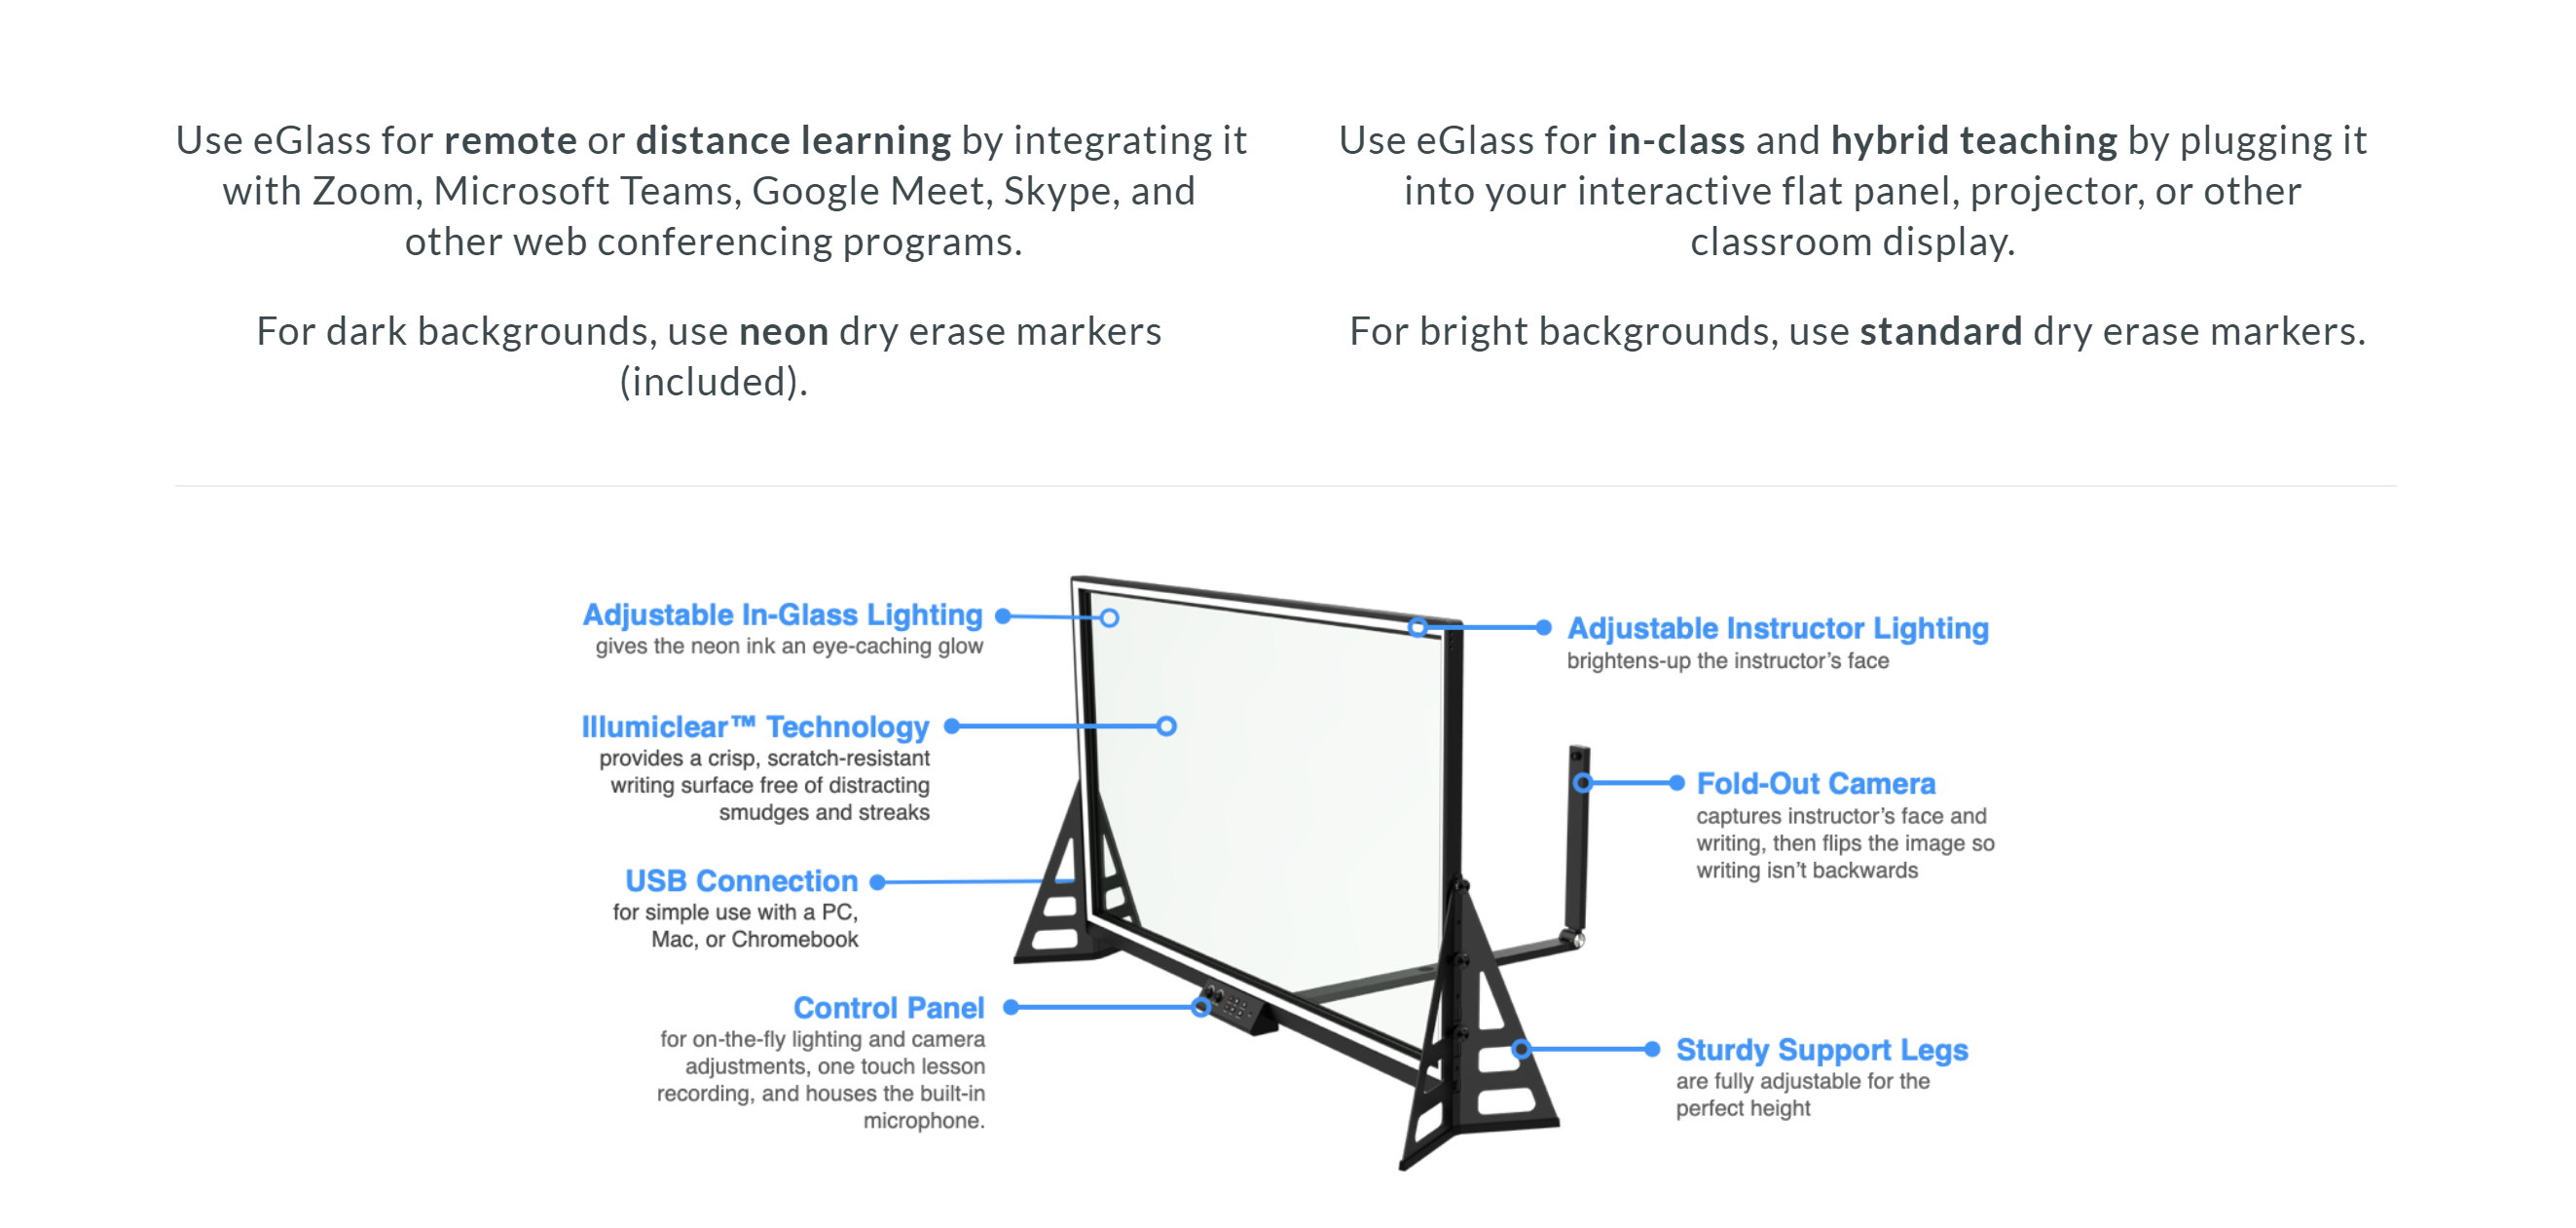 Adjustable in-glass lighting, Illumiclear Technology, USB Connection, Control Panel, Adjustable Instructor Lighting, Fold-out camera, Sturdy support legs